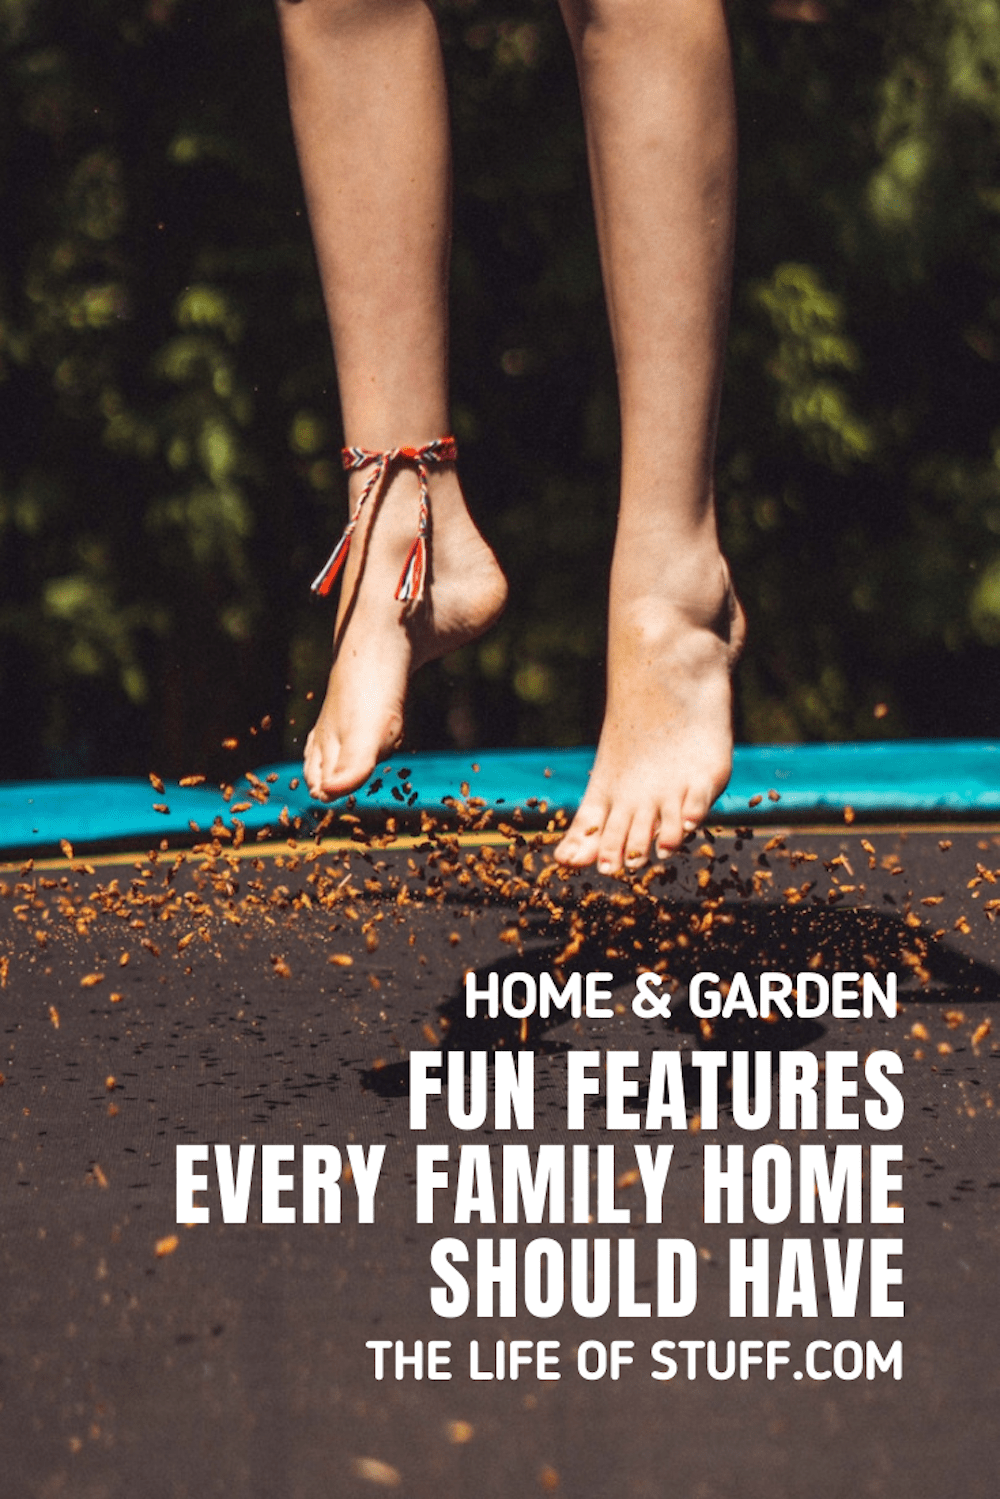 Fun Features Every Family Home Should Have - The Life of Stuff